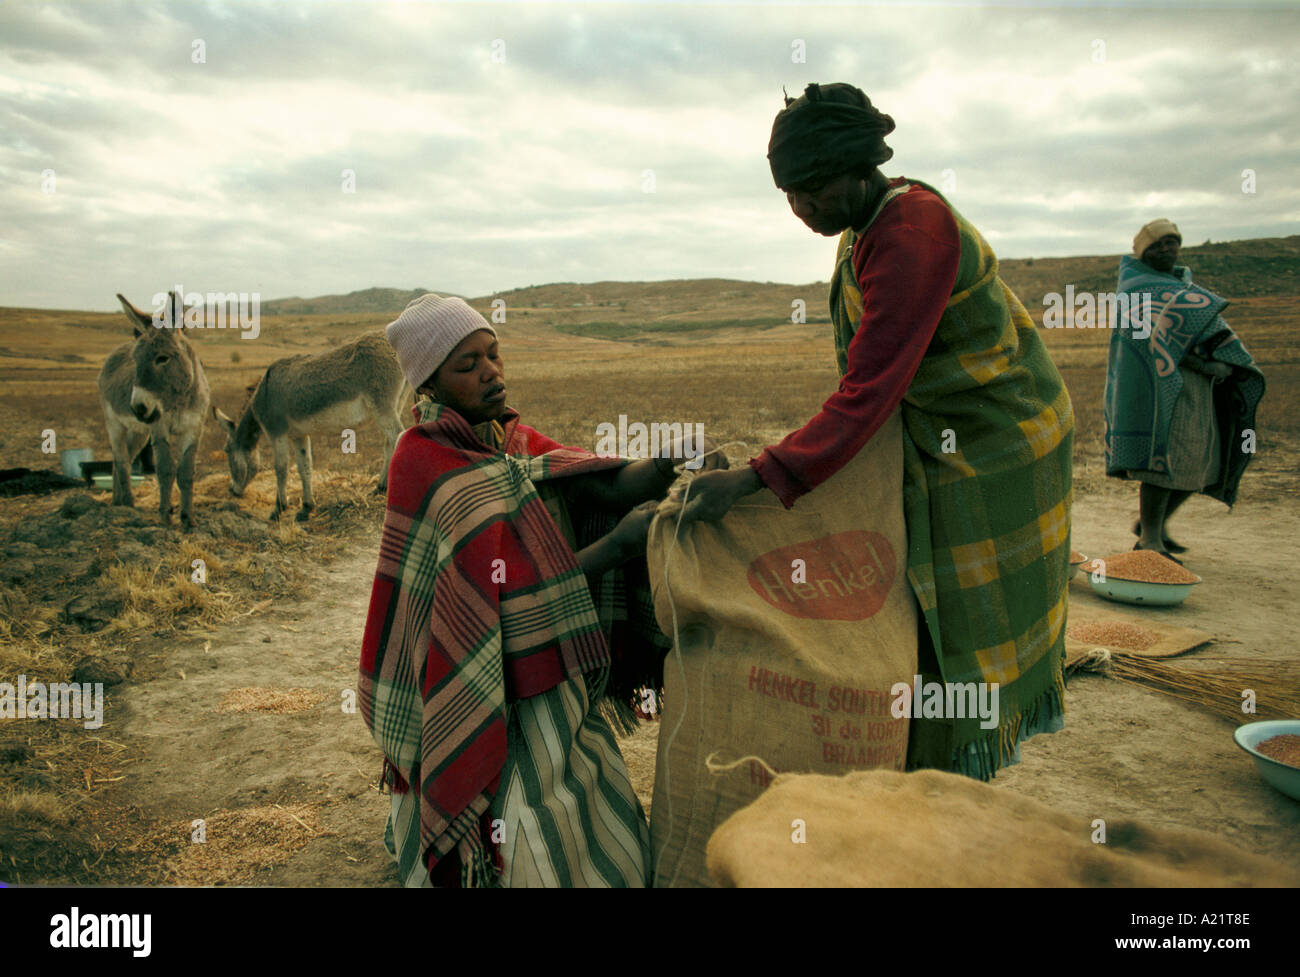 Women wearing blankets harvesting maize and putting maize into sack. Stock Photo